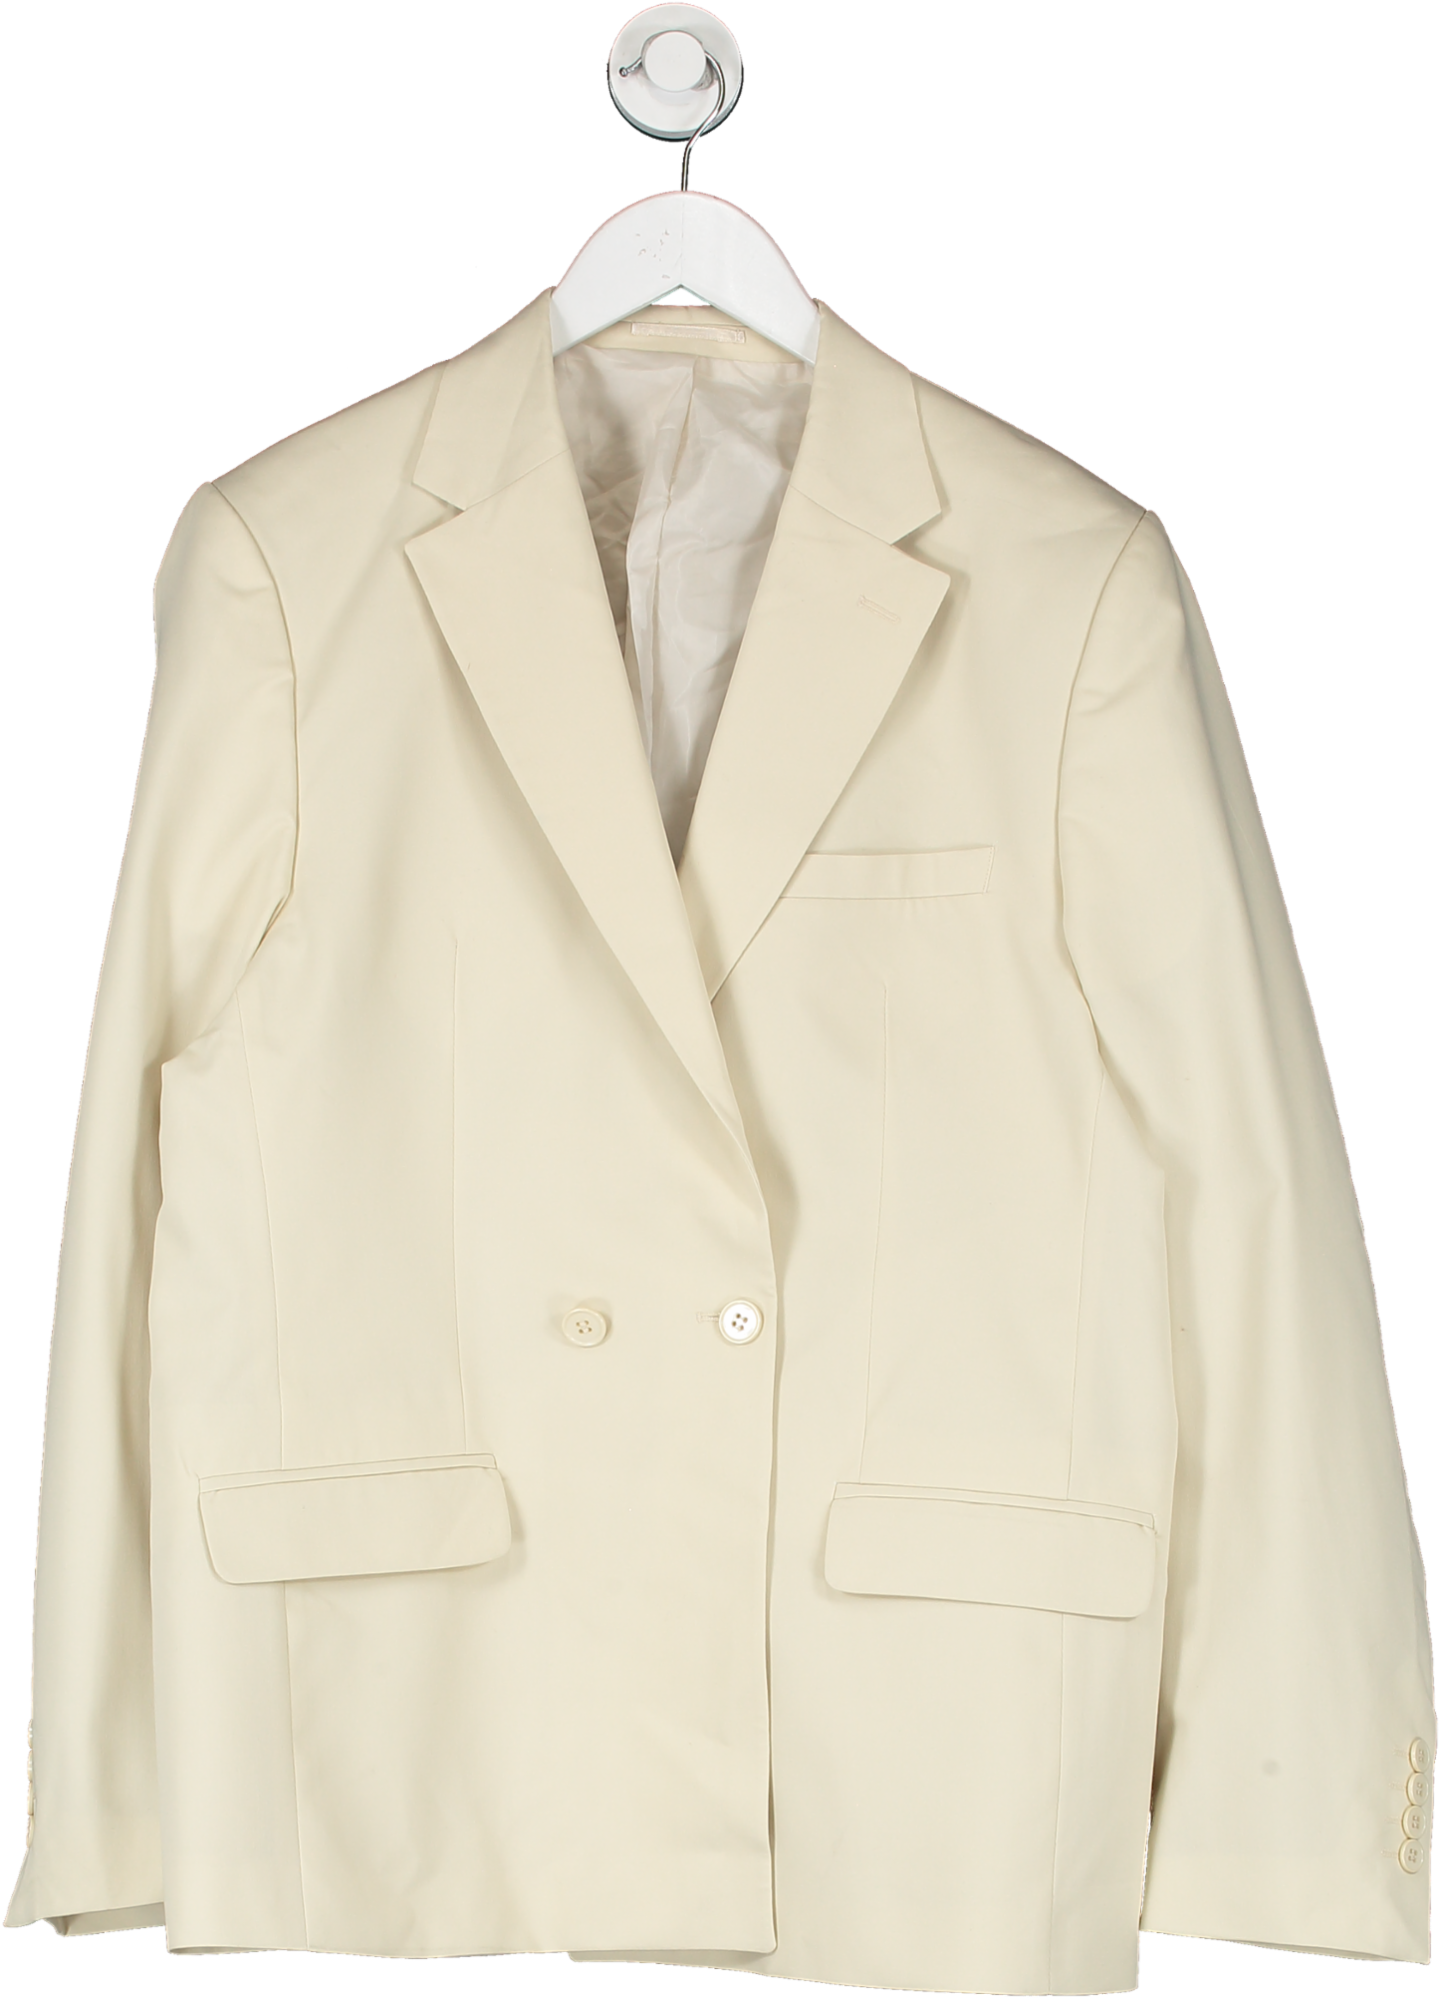 boohooMan Cream Relaxed Suit Jacket UK 10